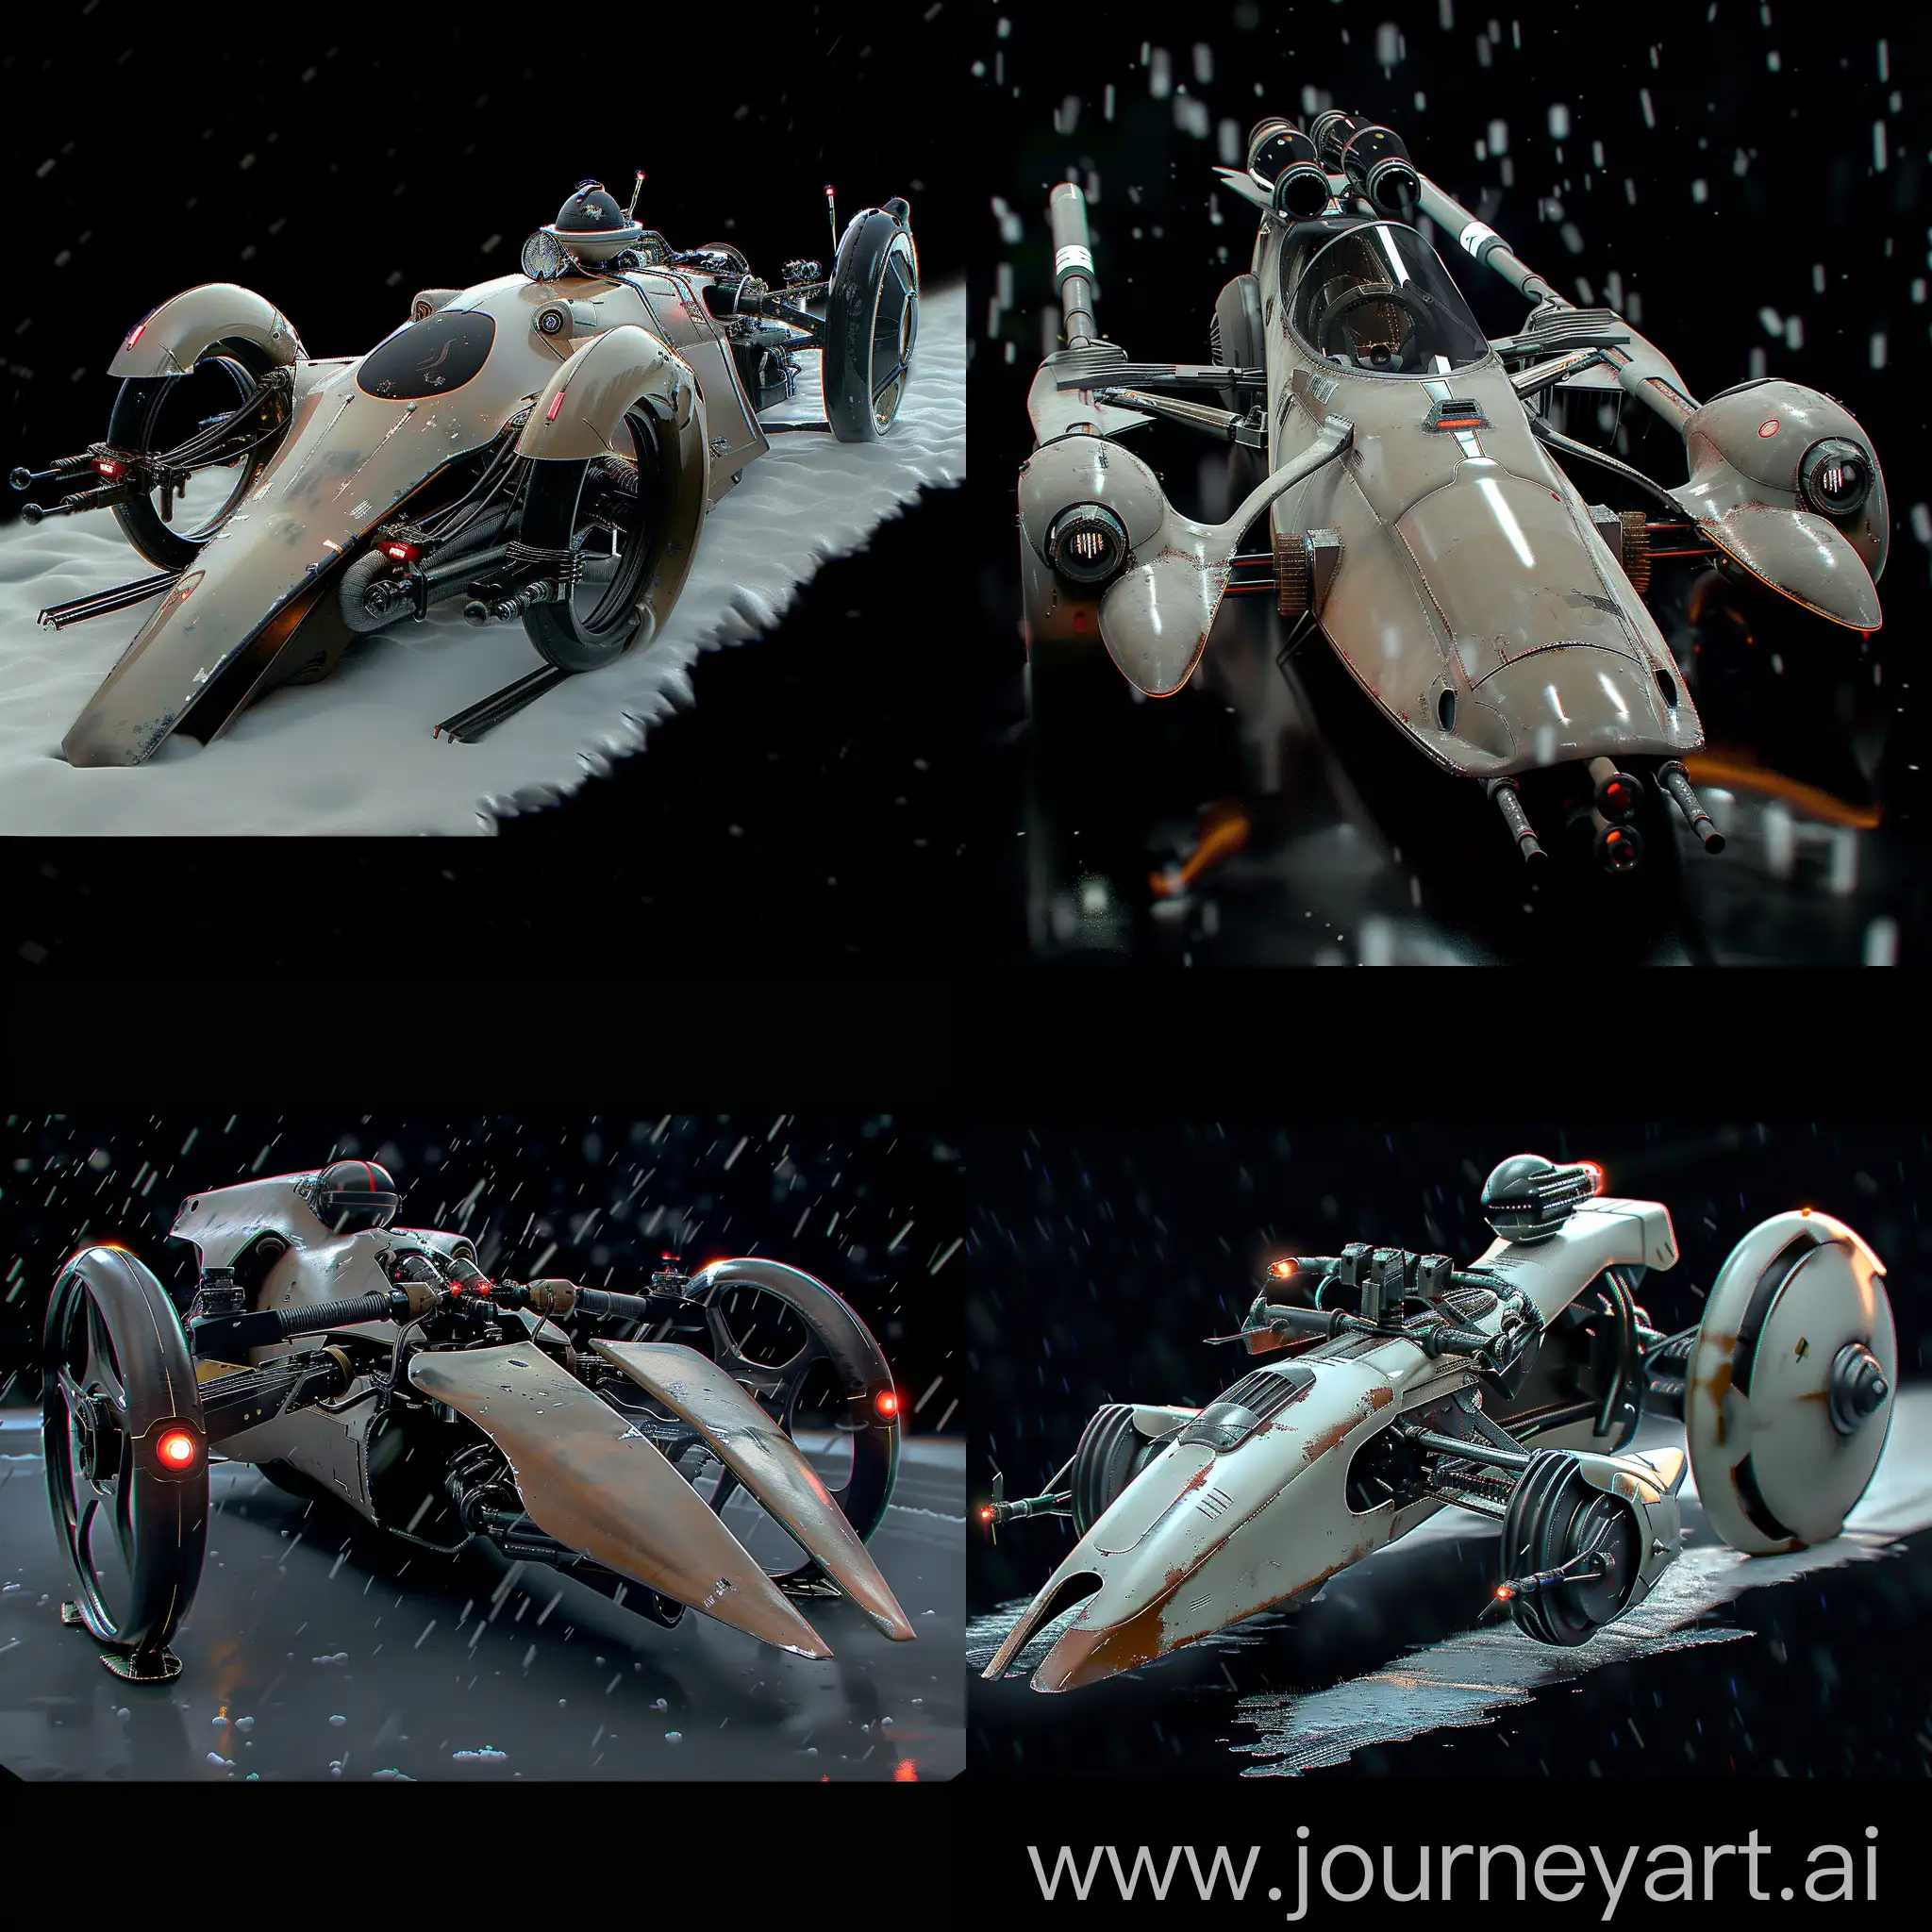 Futuristic-Star-Wars-Speeder-Bike-with-Electric-Propulsion-and-Advanced-Technology